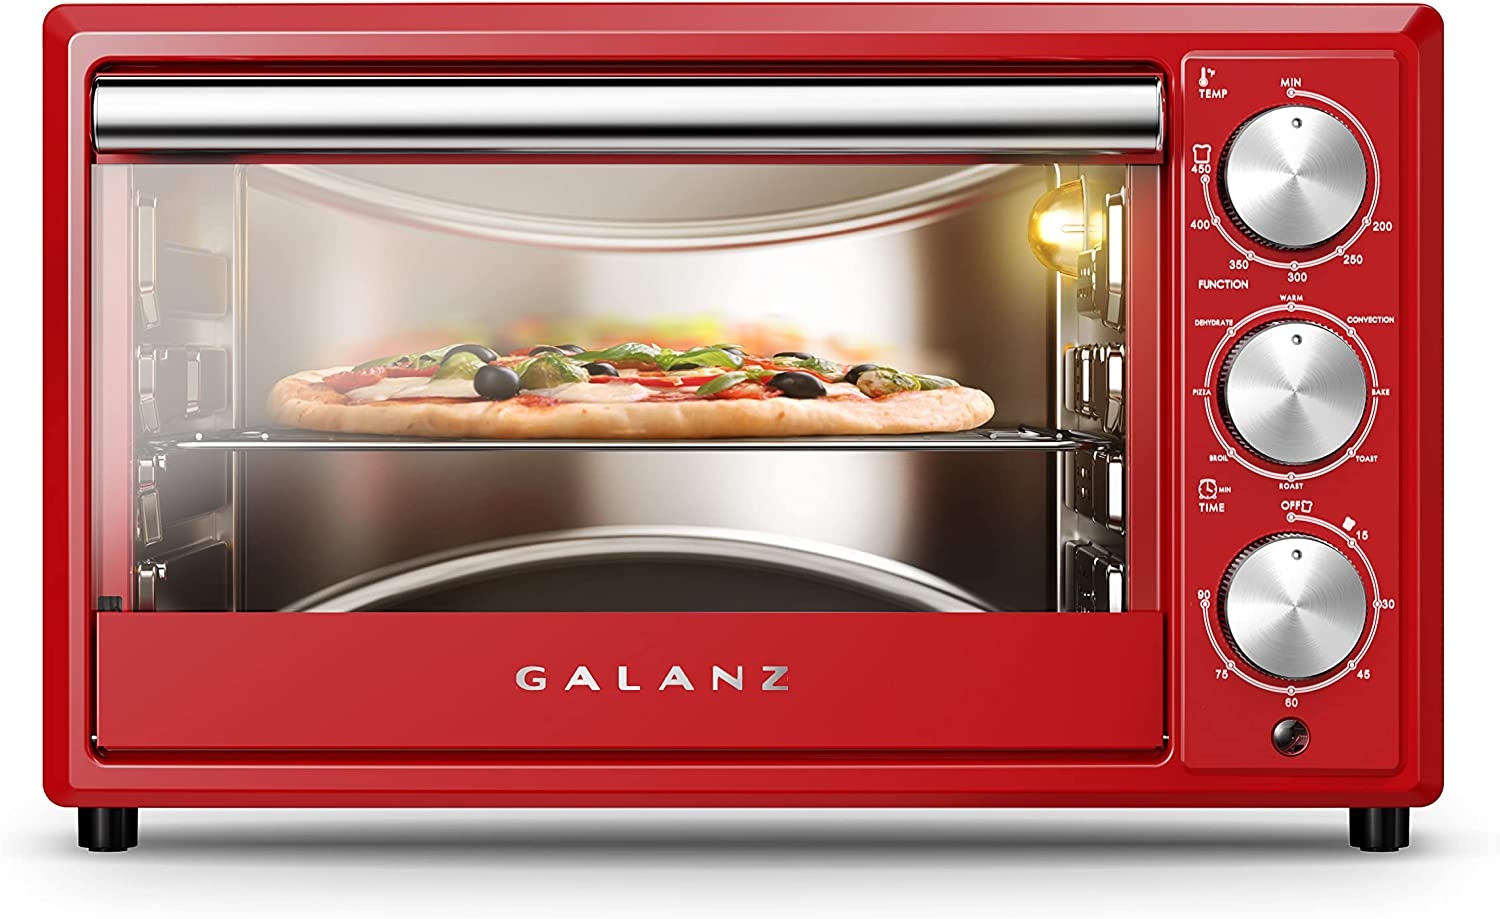 Galanz Large 6-Slice True Convection Toaster Oven, 8-in-1 Combo Bake, Toast, Roast, Broil, 12” Pizza, Dehydrator with Keep